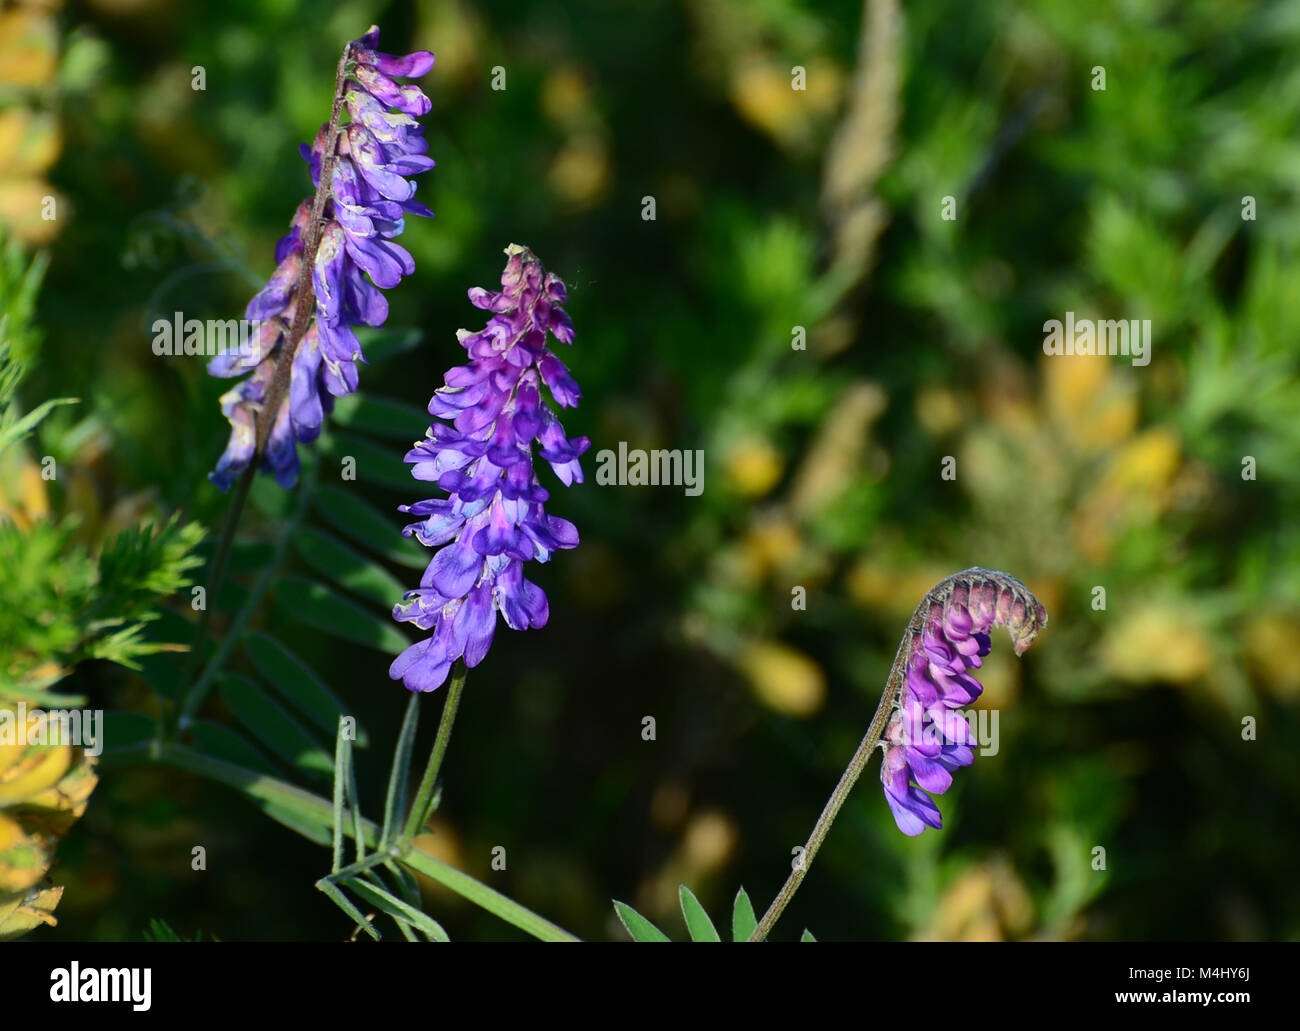 Tufted Vetch in meadow with purple flowers and tendrils, pea family, UK Stock Photo